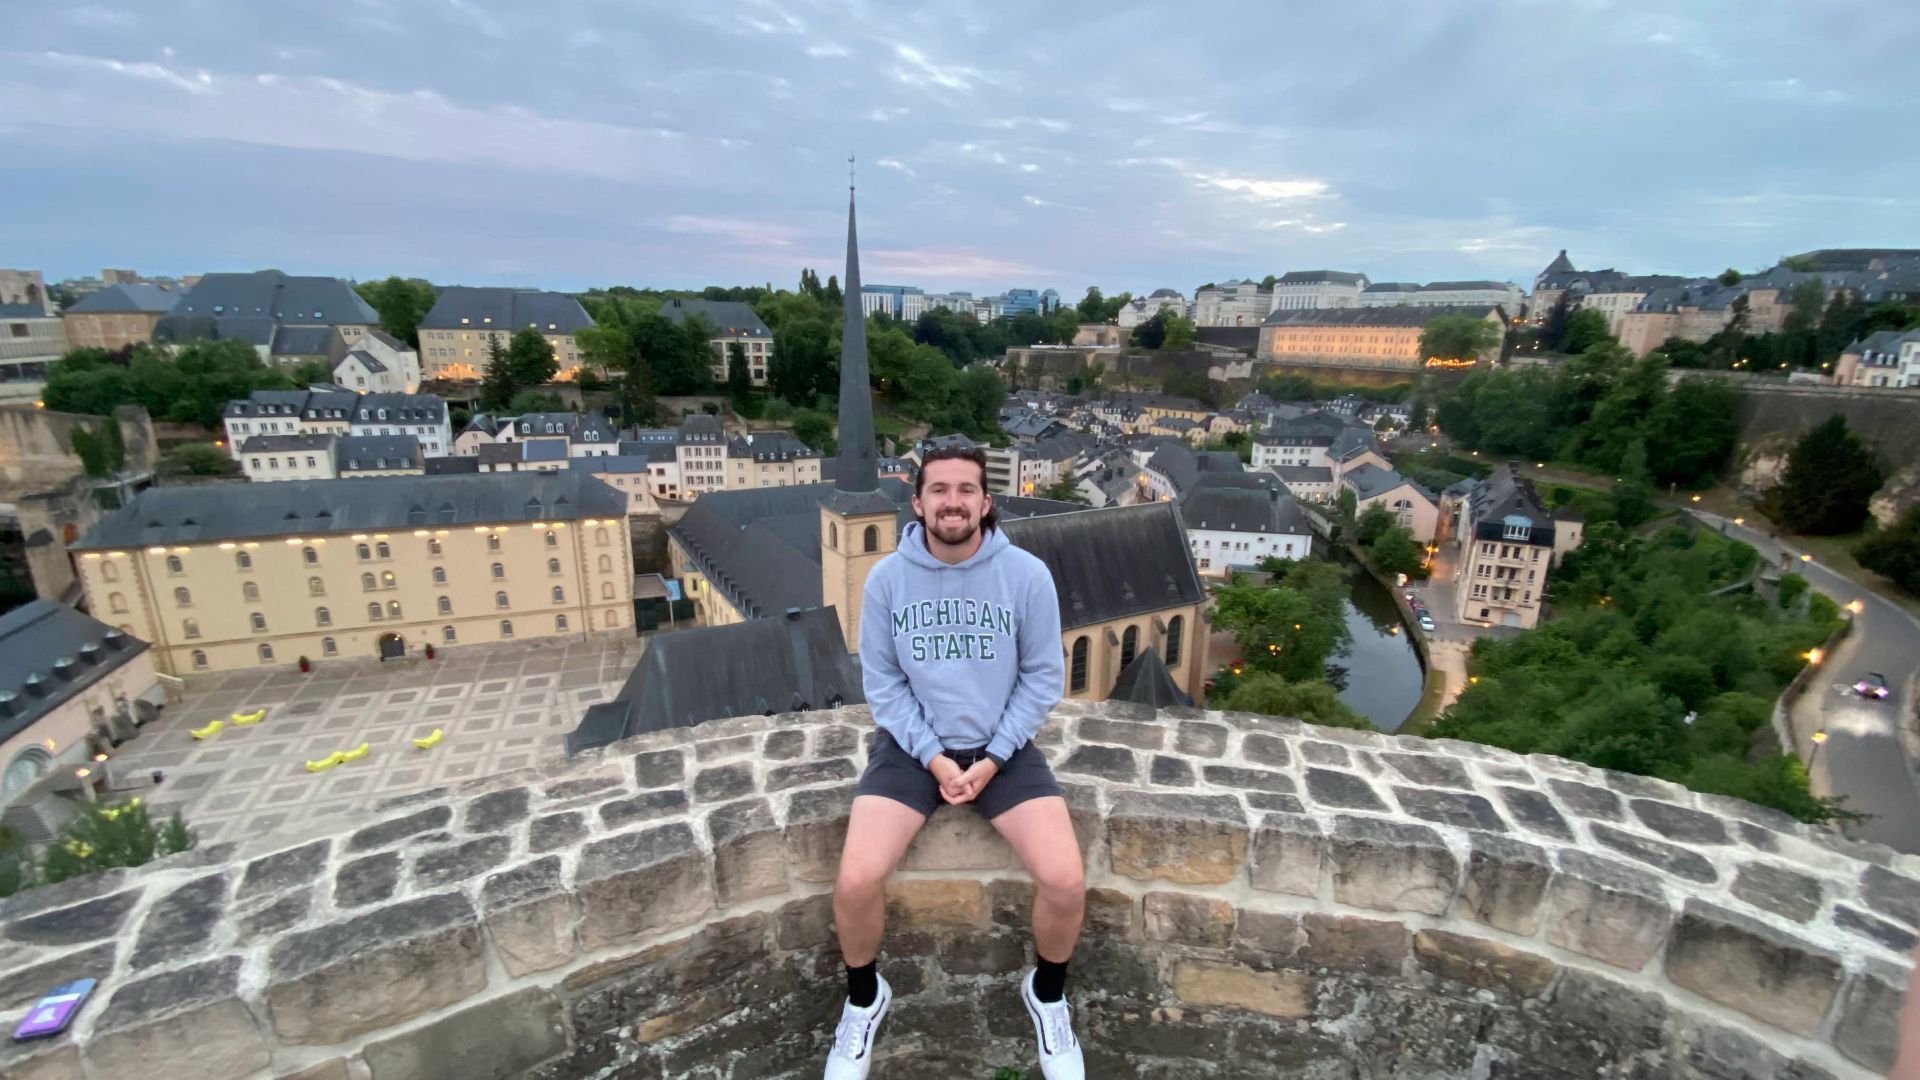 Garret sitting on stone wall overlooking Luxembourg